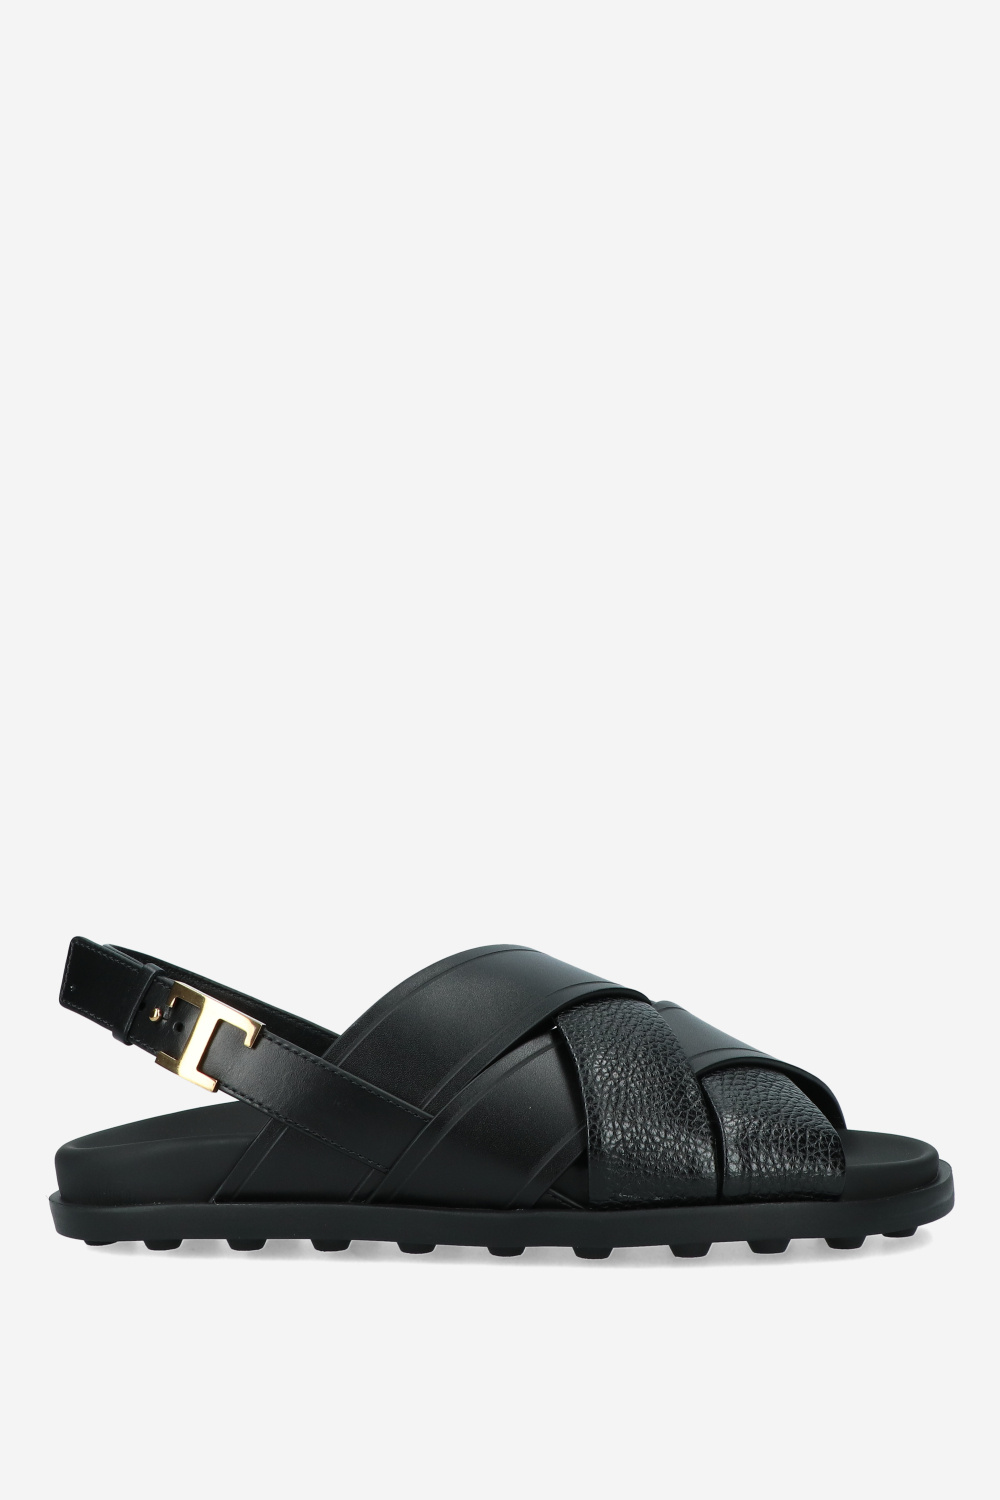 Tod's Tods slippers | Grailed